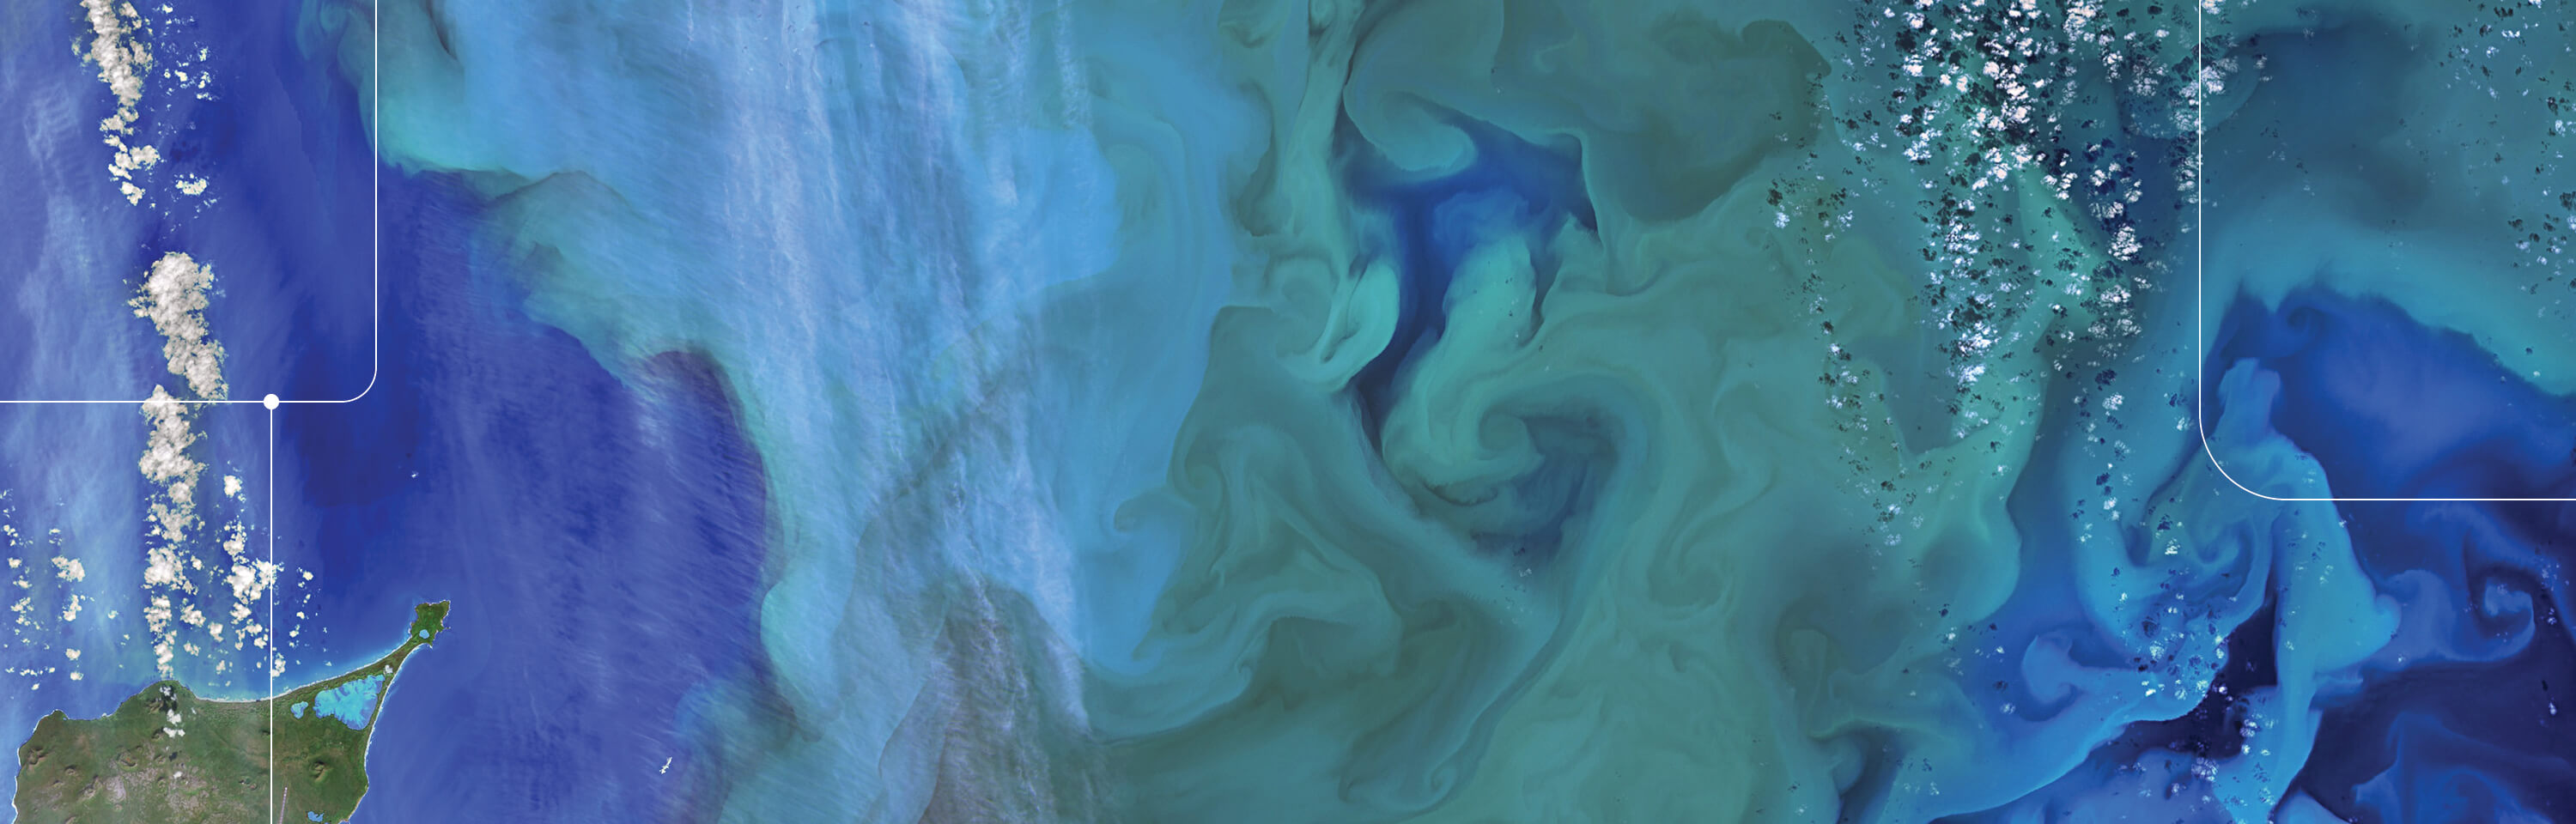 Satellite view of topography of land and blue/teal swirling water, dappled with clouds